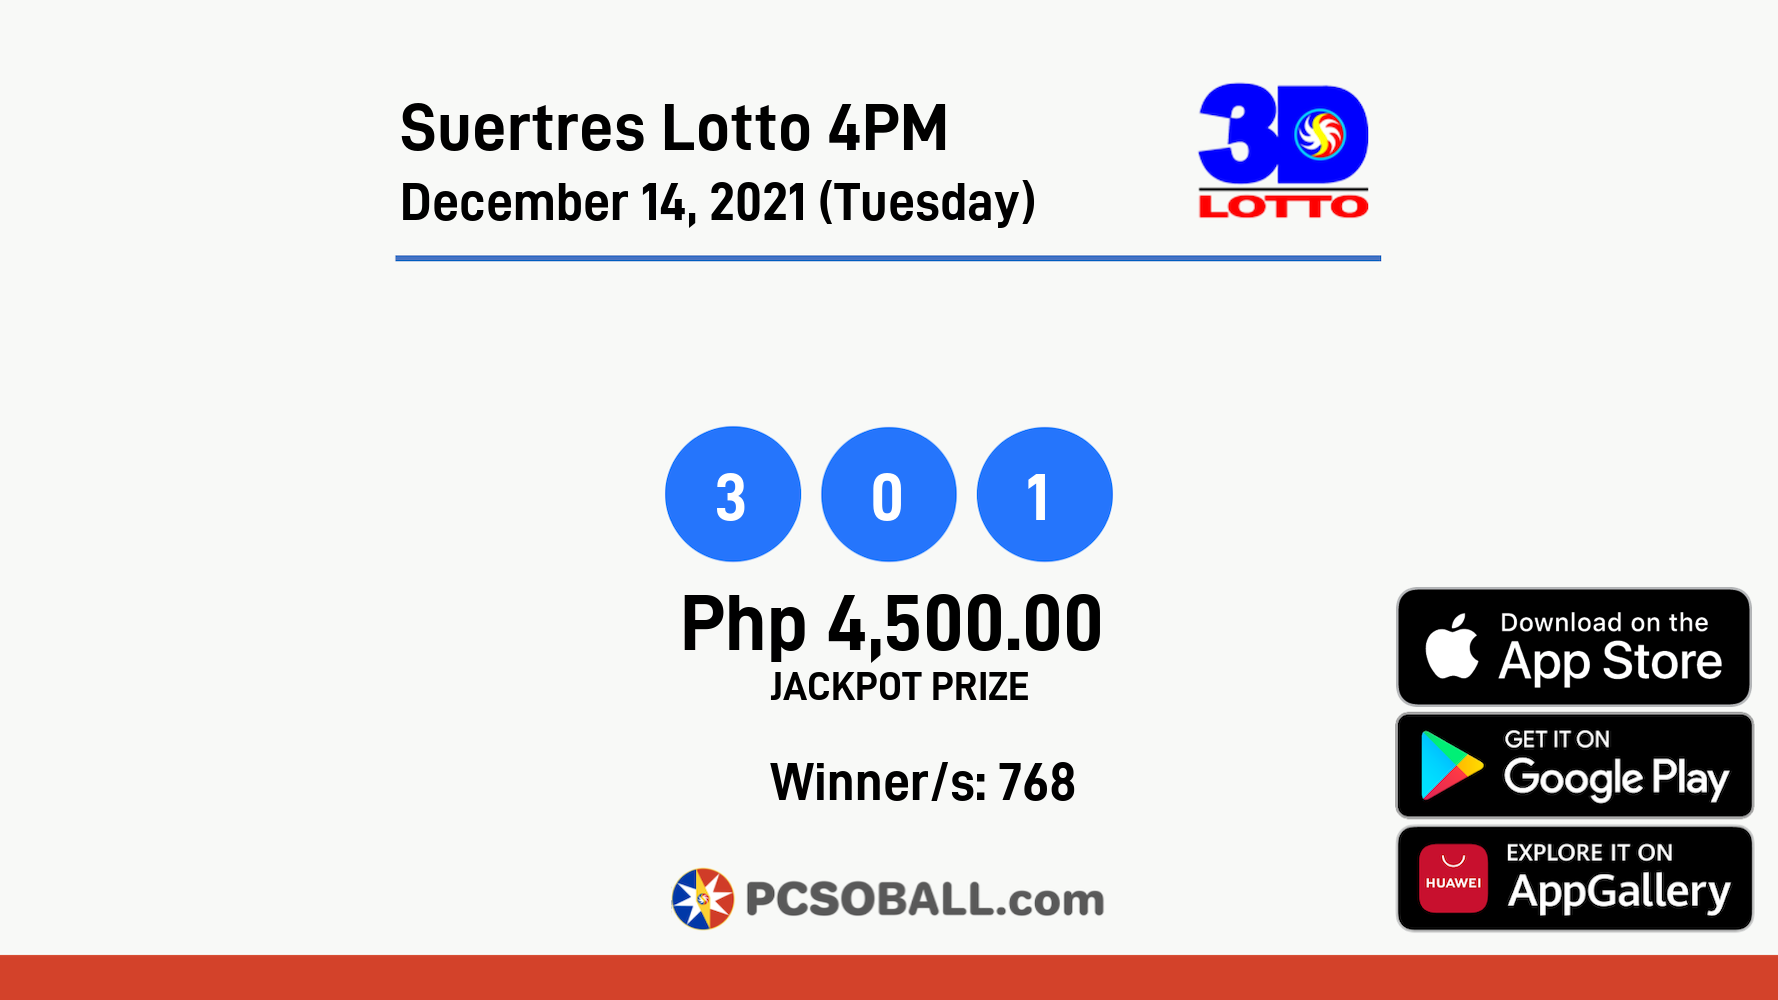 Suertres Lotto 4PM December 14, 2021 (Tuesday) Result